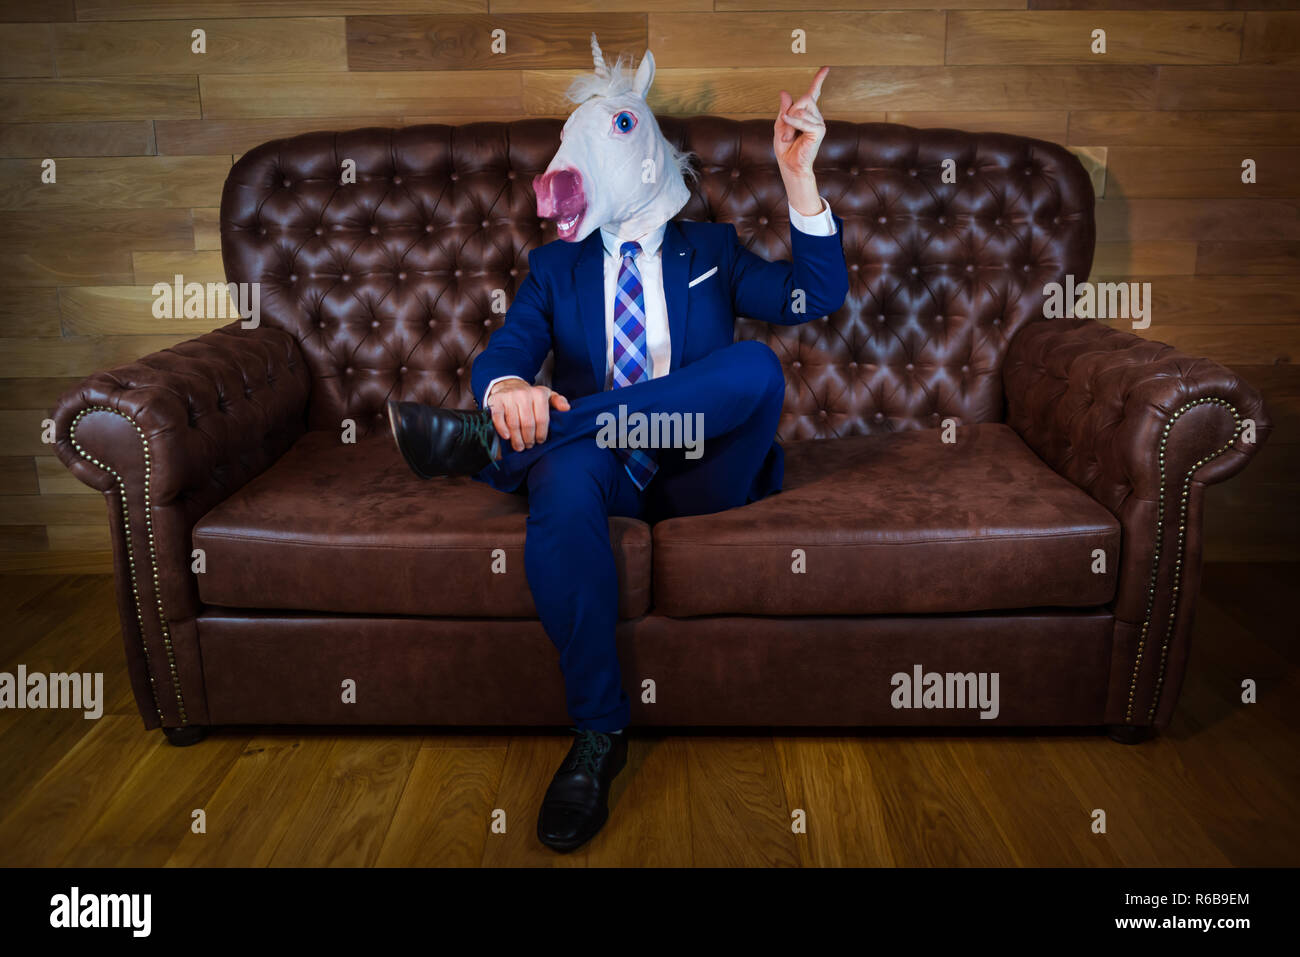 Funny unicorn in elegant suit siting on sofa like a boss and showing hand gesture with raised index finger. Unusual man at home. Freaky guy in mask. Stock Photo